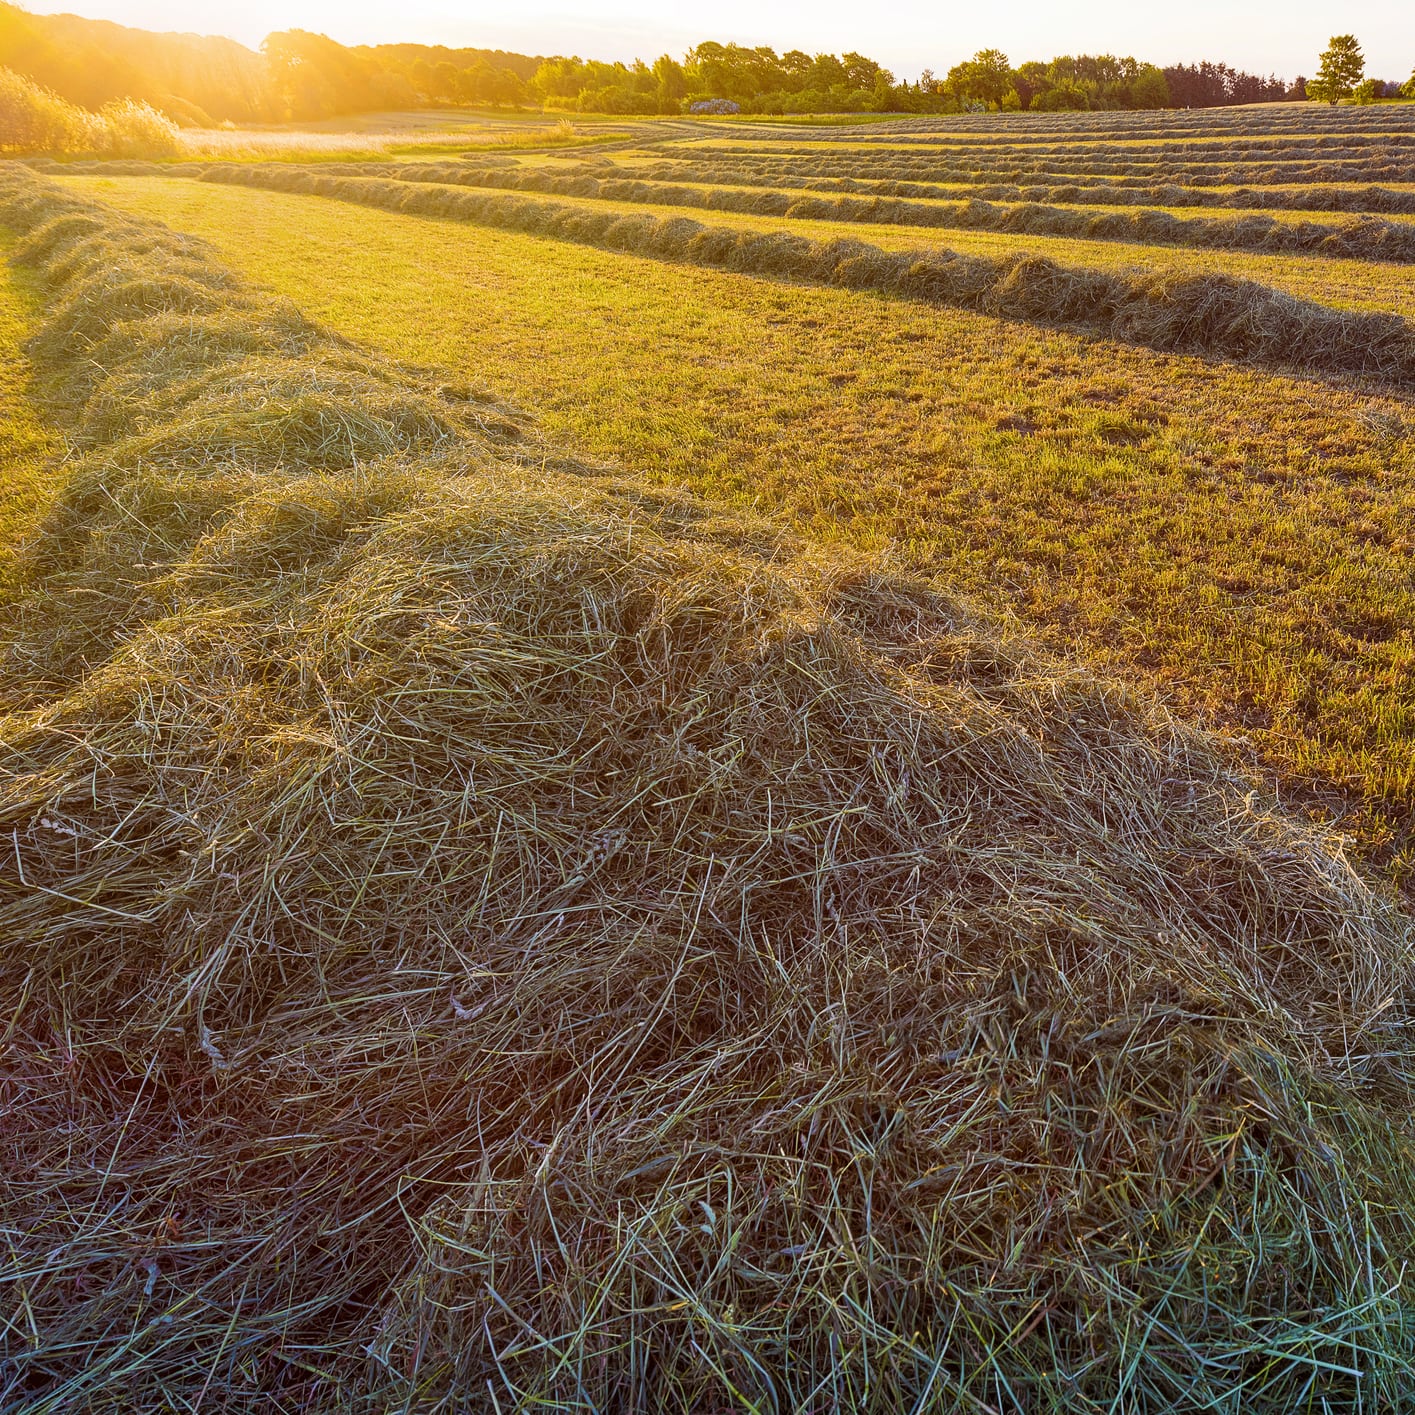 Sun setting on a field of freshly cut hay in the countryside